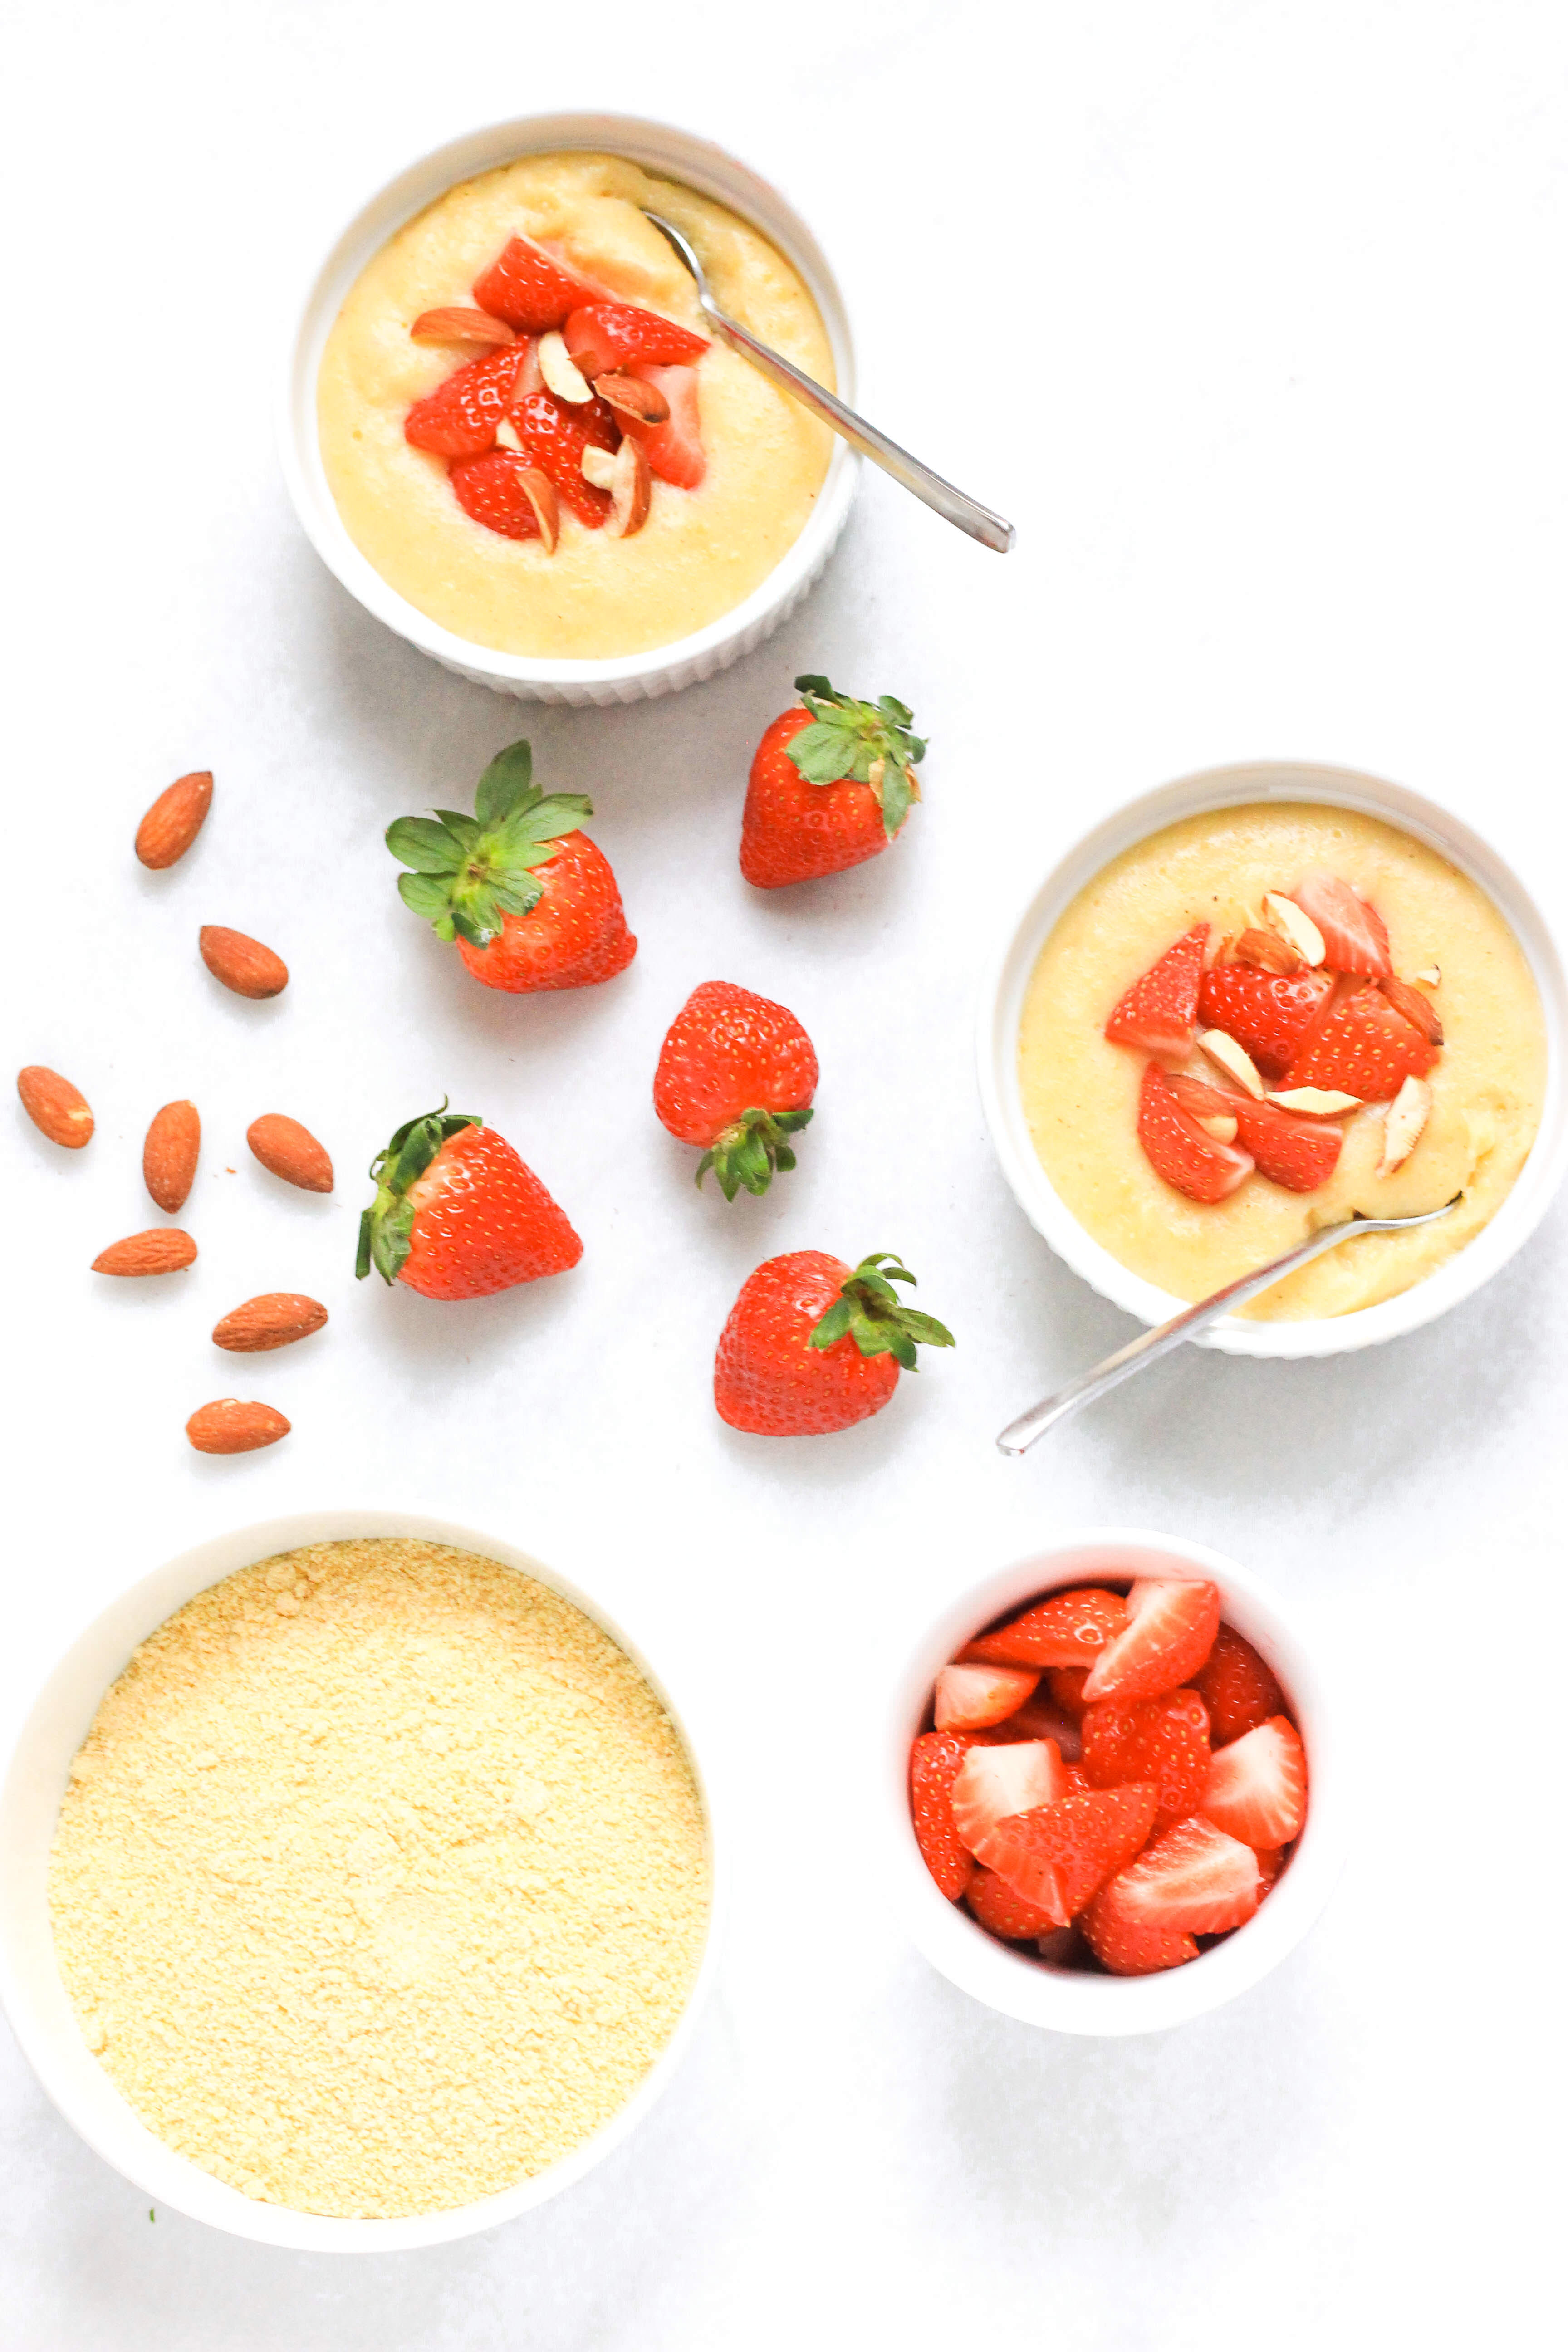 Creamy breakfast polenta in ramekins topped with strawberries and almonds.